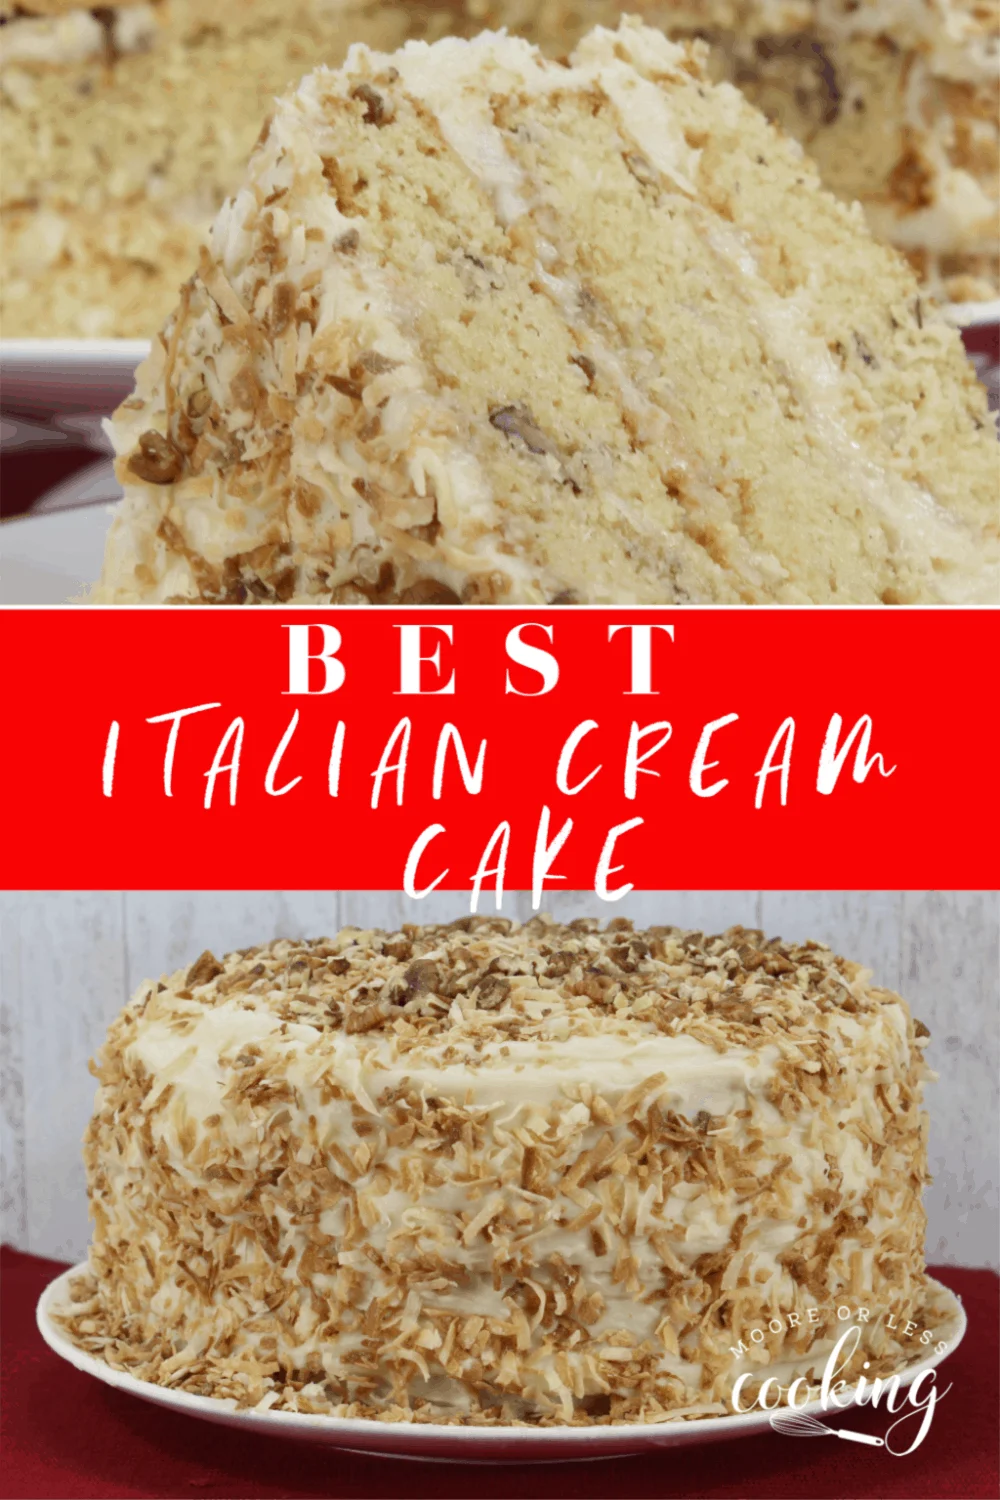 Italian Cream Cake~ This show stopper cake has 3-layers of the moistest, delicious cake that is made with toasted coconut, pecans, and a fluffy cream cheese frosting.  #mooreorlesscooking #Italiancake #creamcake #cake #pecans #coconut via @Mooreorlesscook